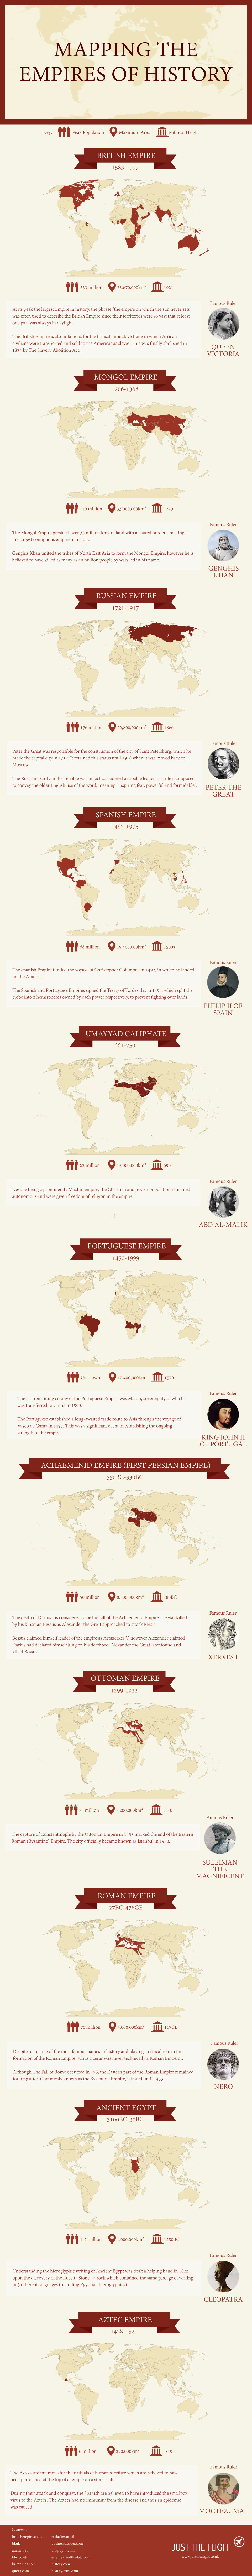 Mapping the Greatest Empires of History